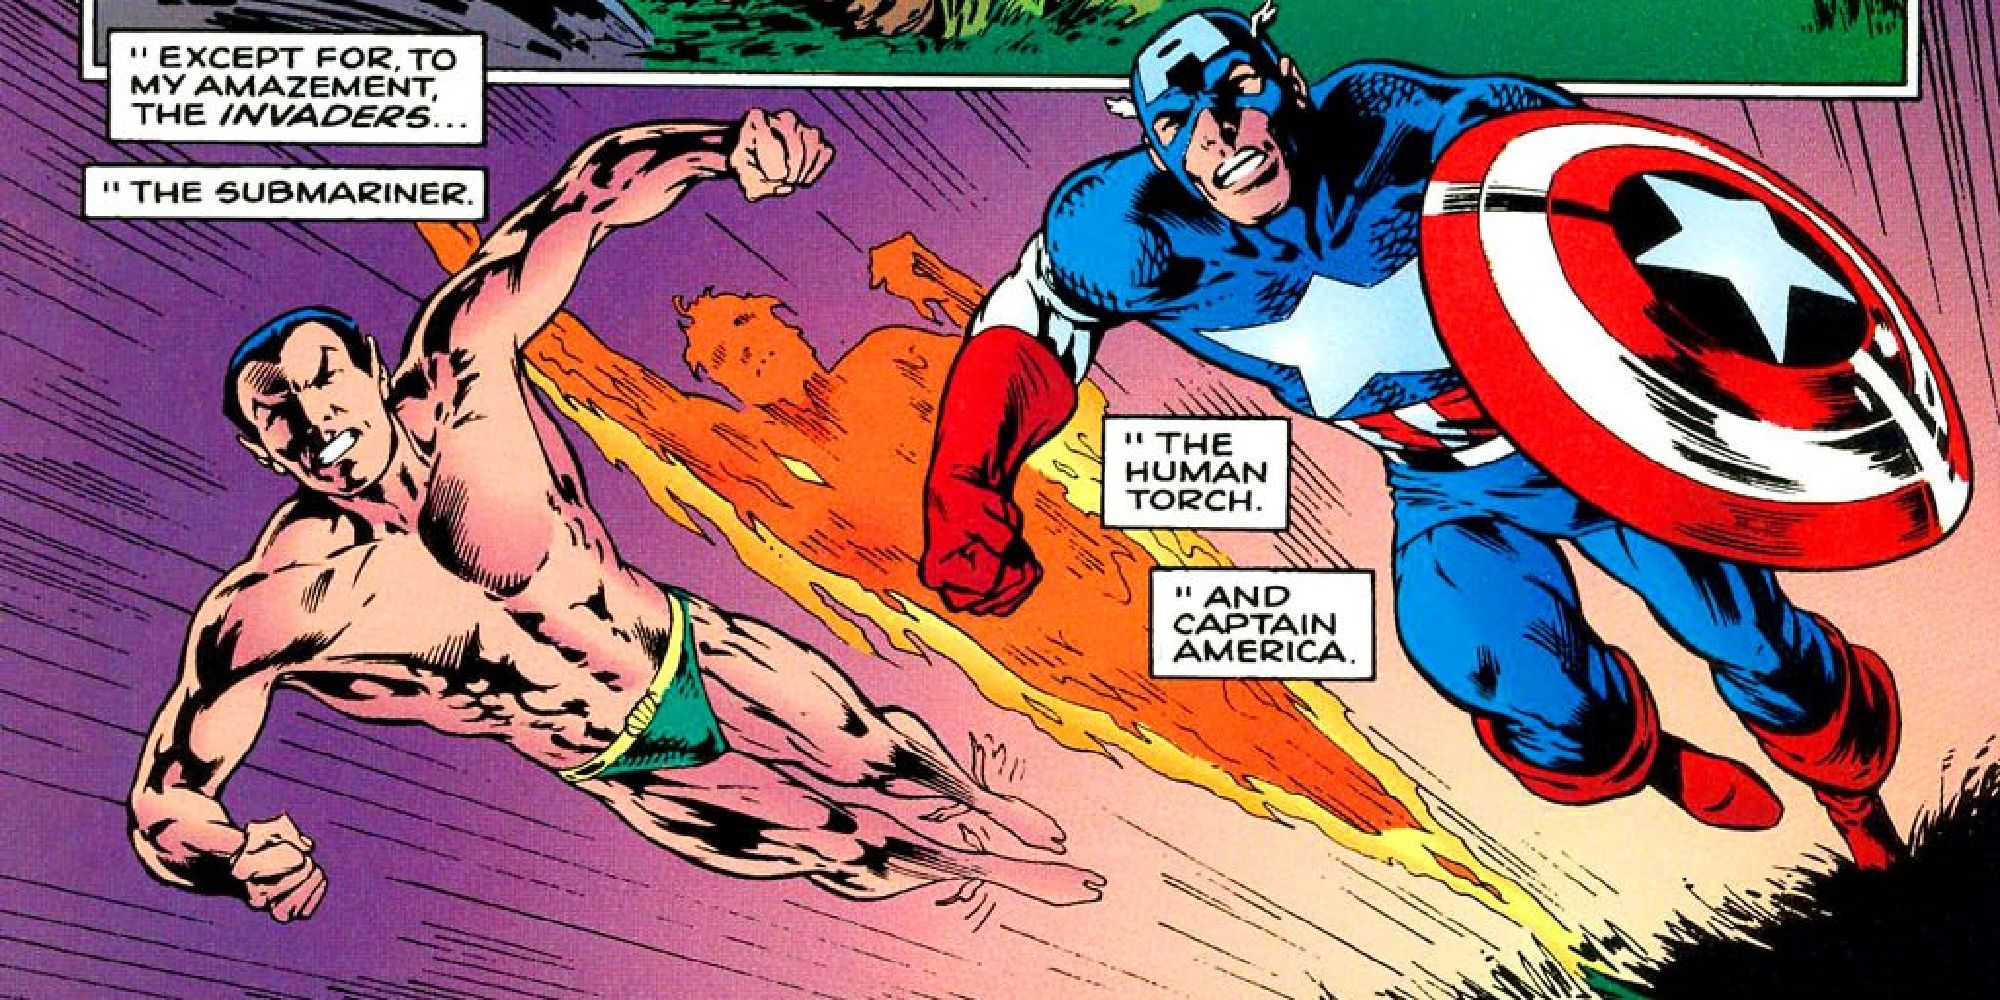 The Invaders rush into battle in Marvel Comics.